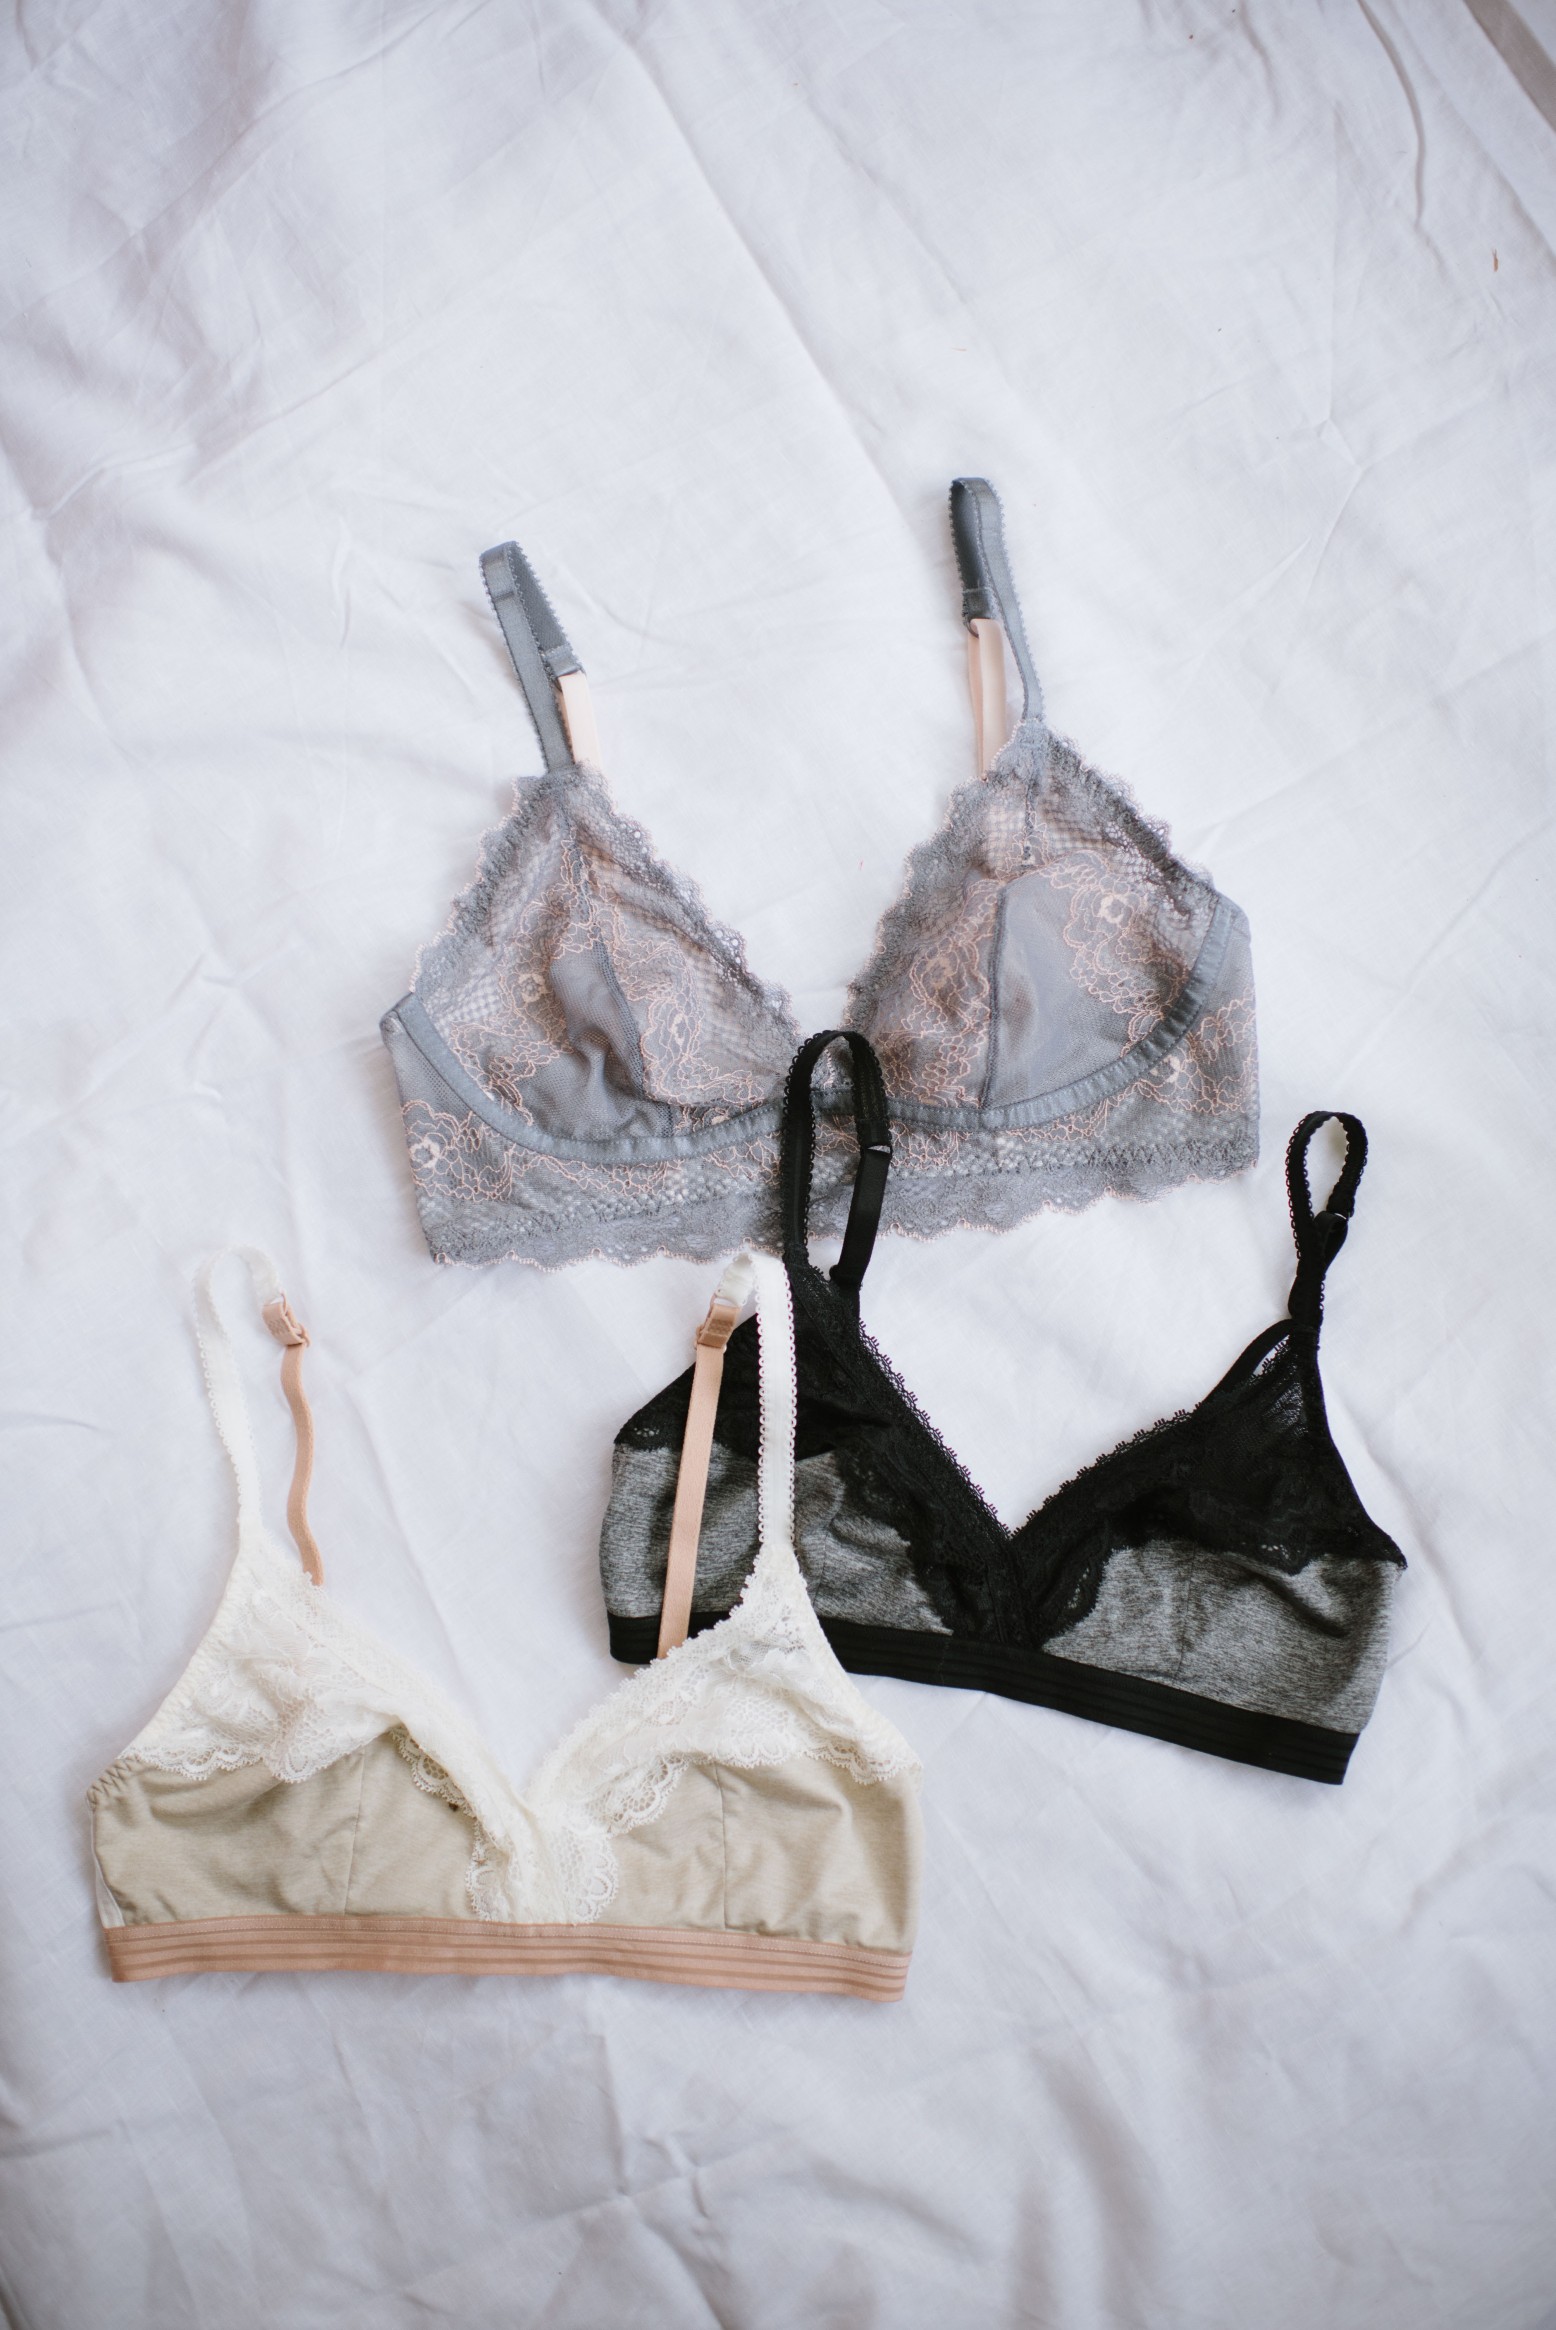 Ask Geneva: What Bra Should I Wear With This Outfit?